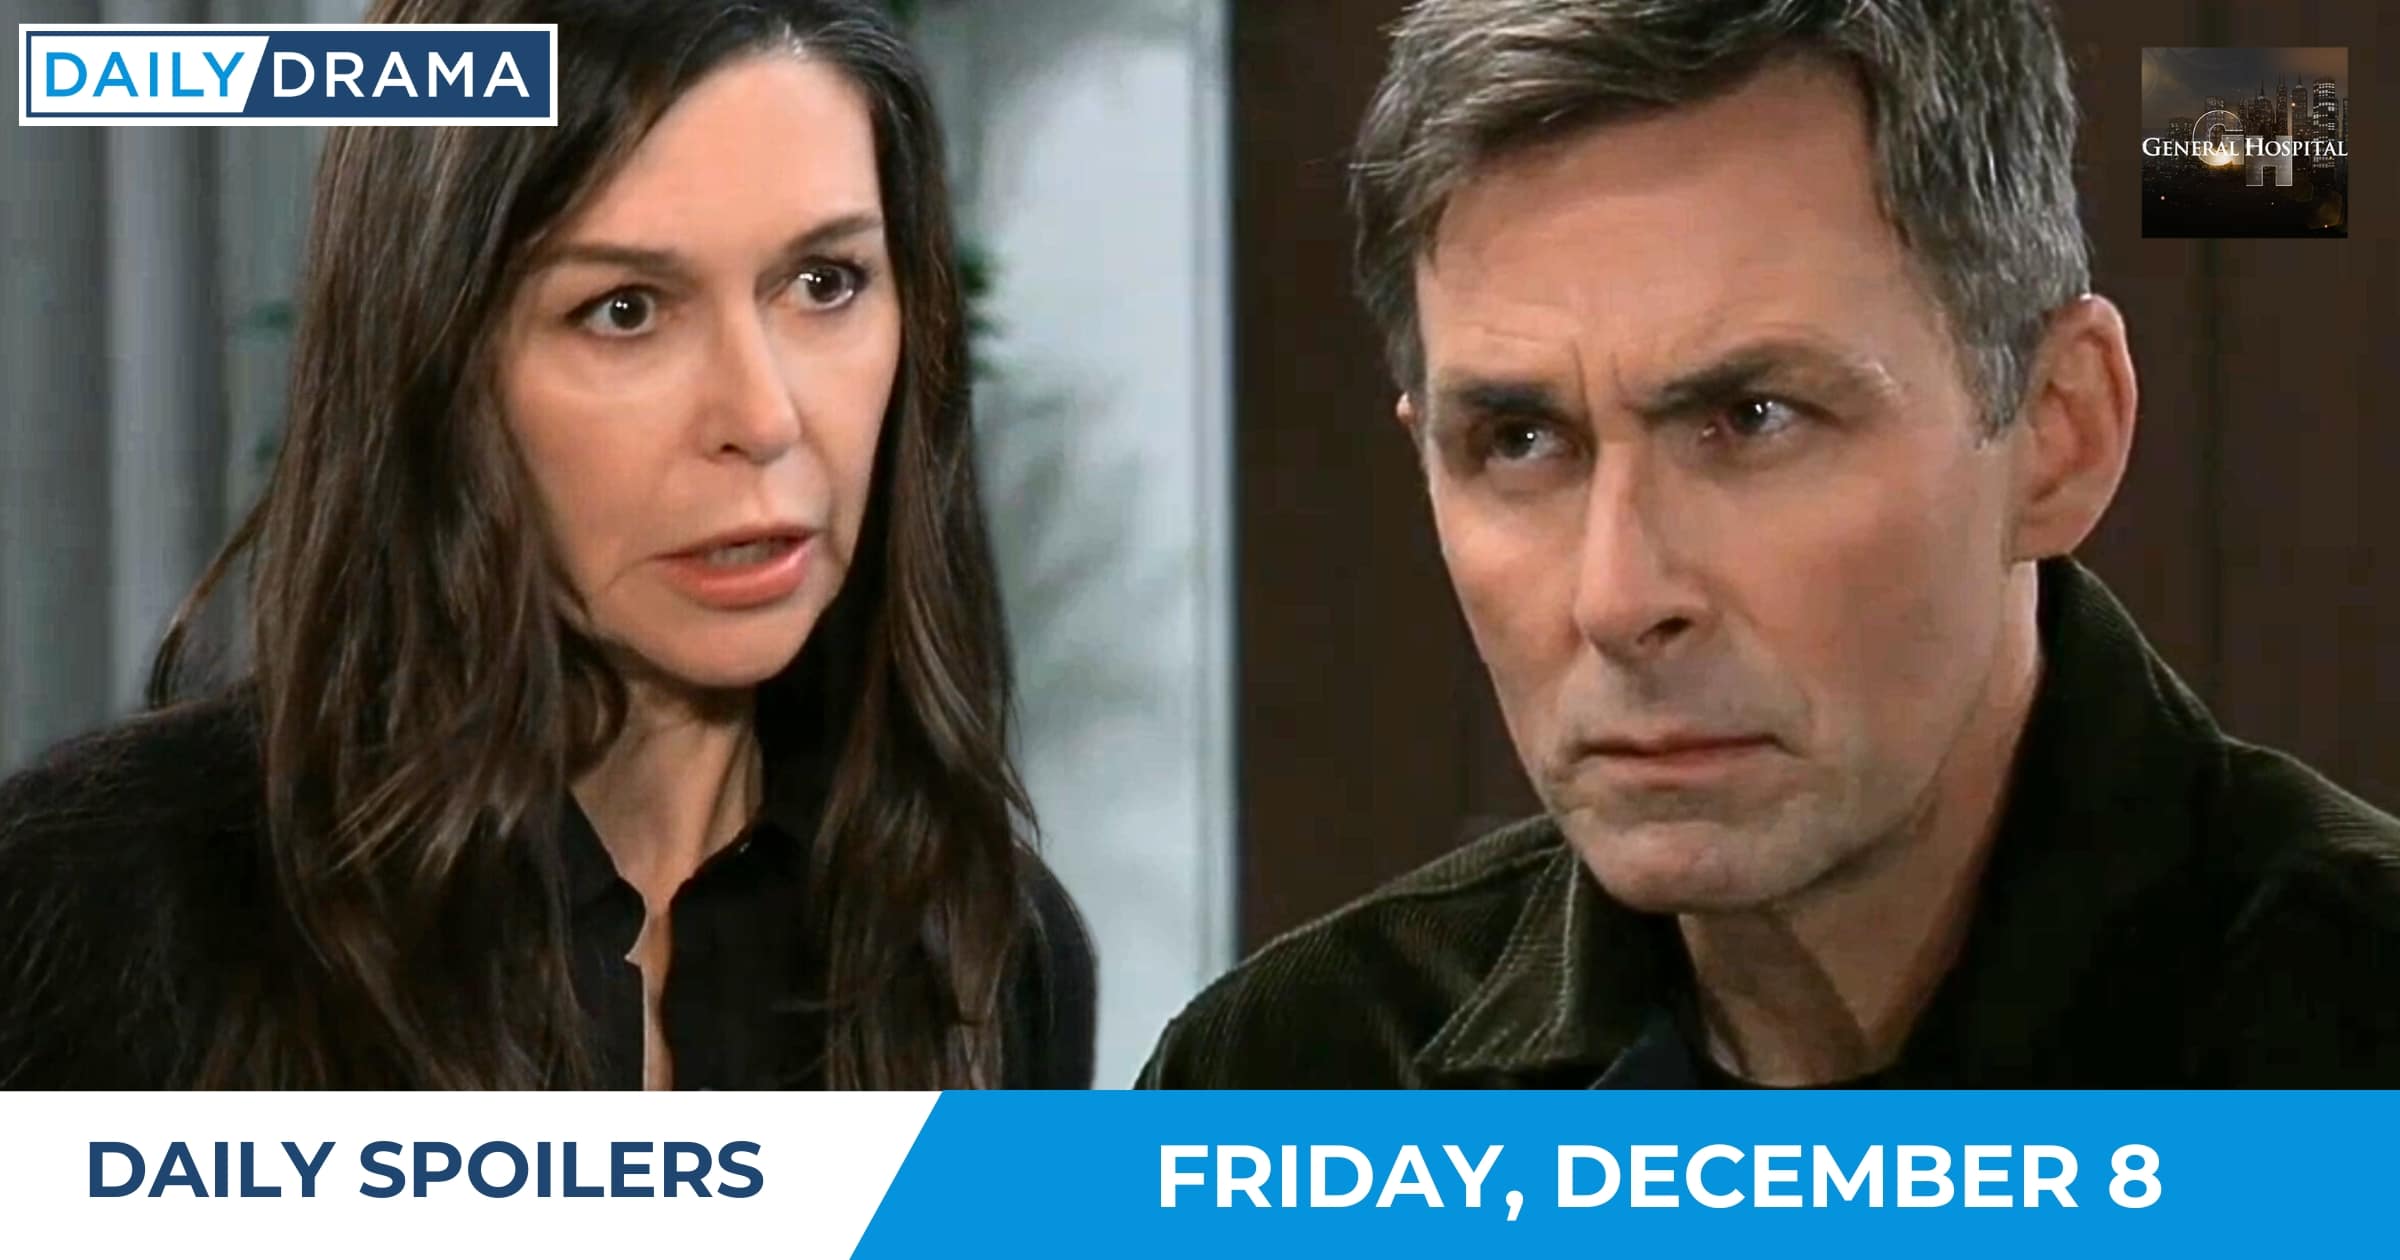 General Hospital Daily Spoilers - Dec 8 - Anna and Valentin